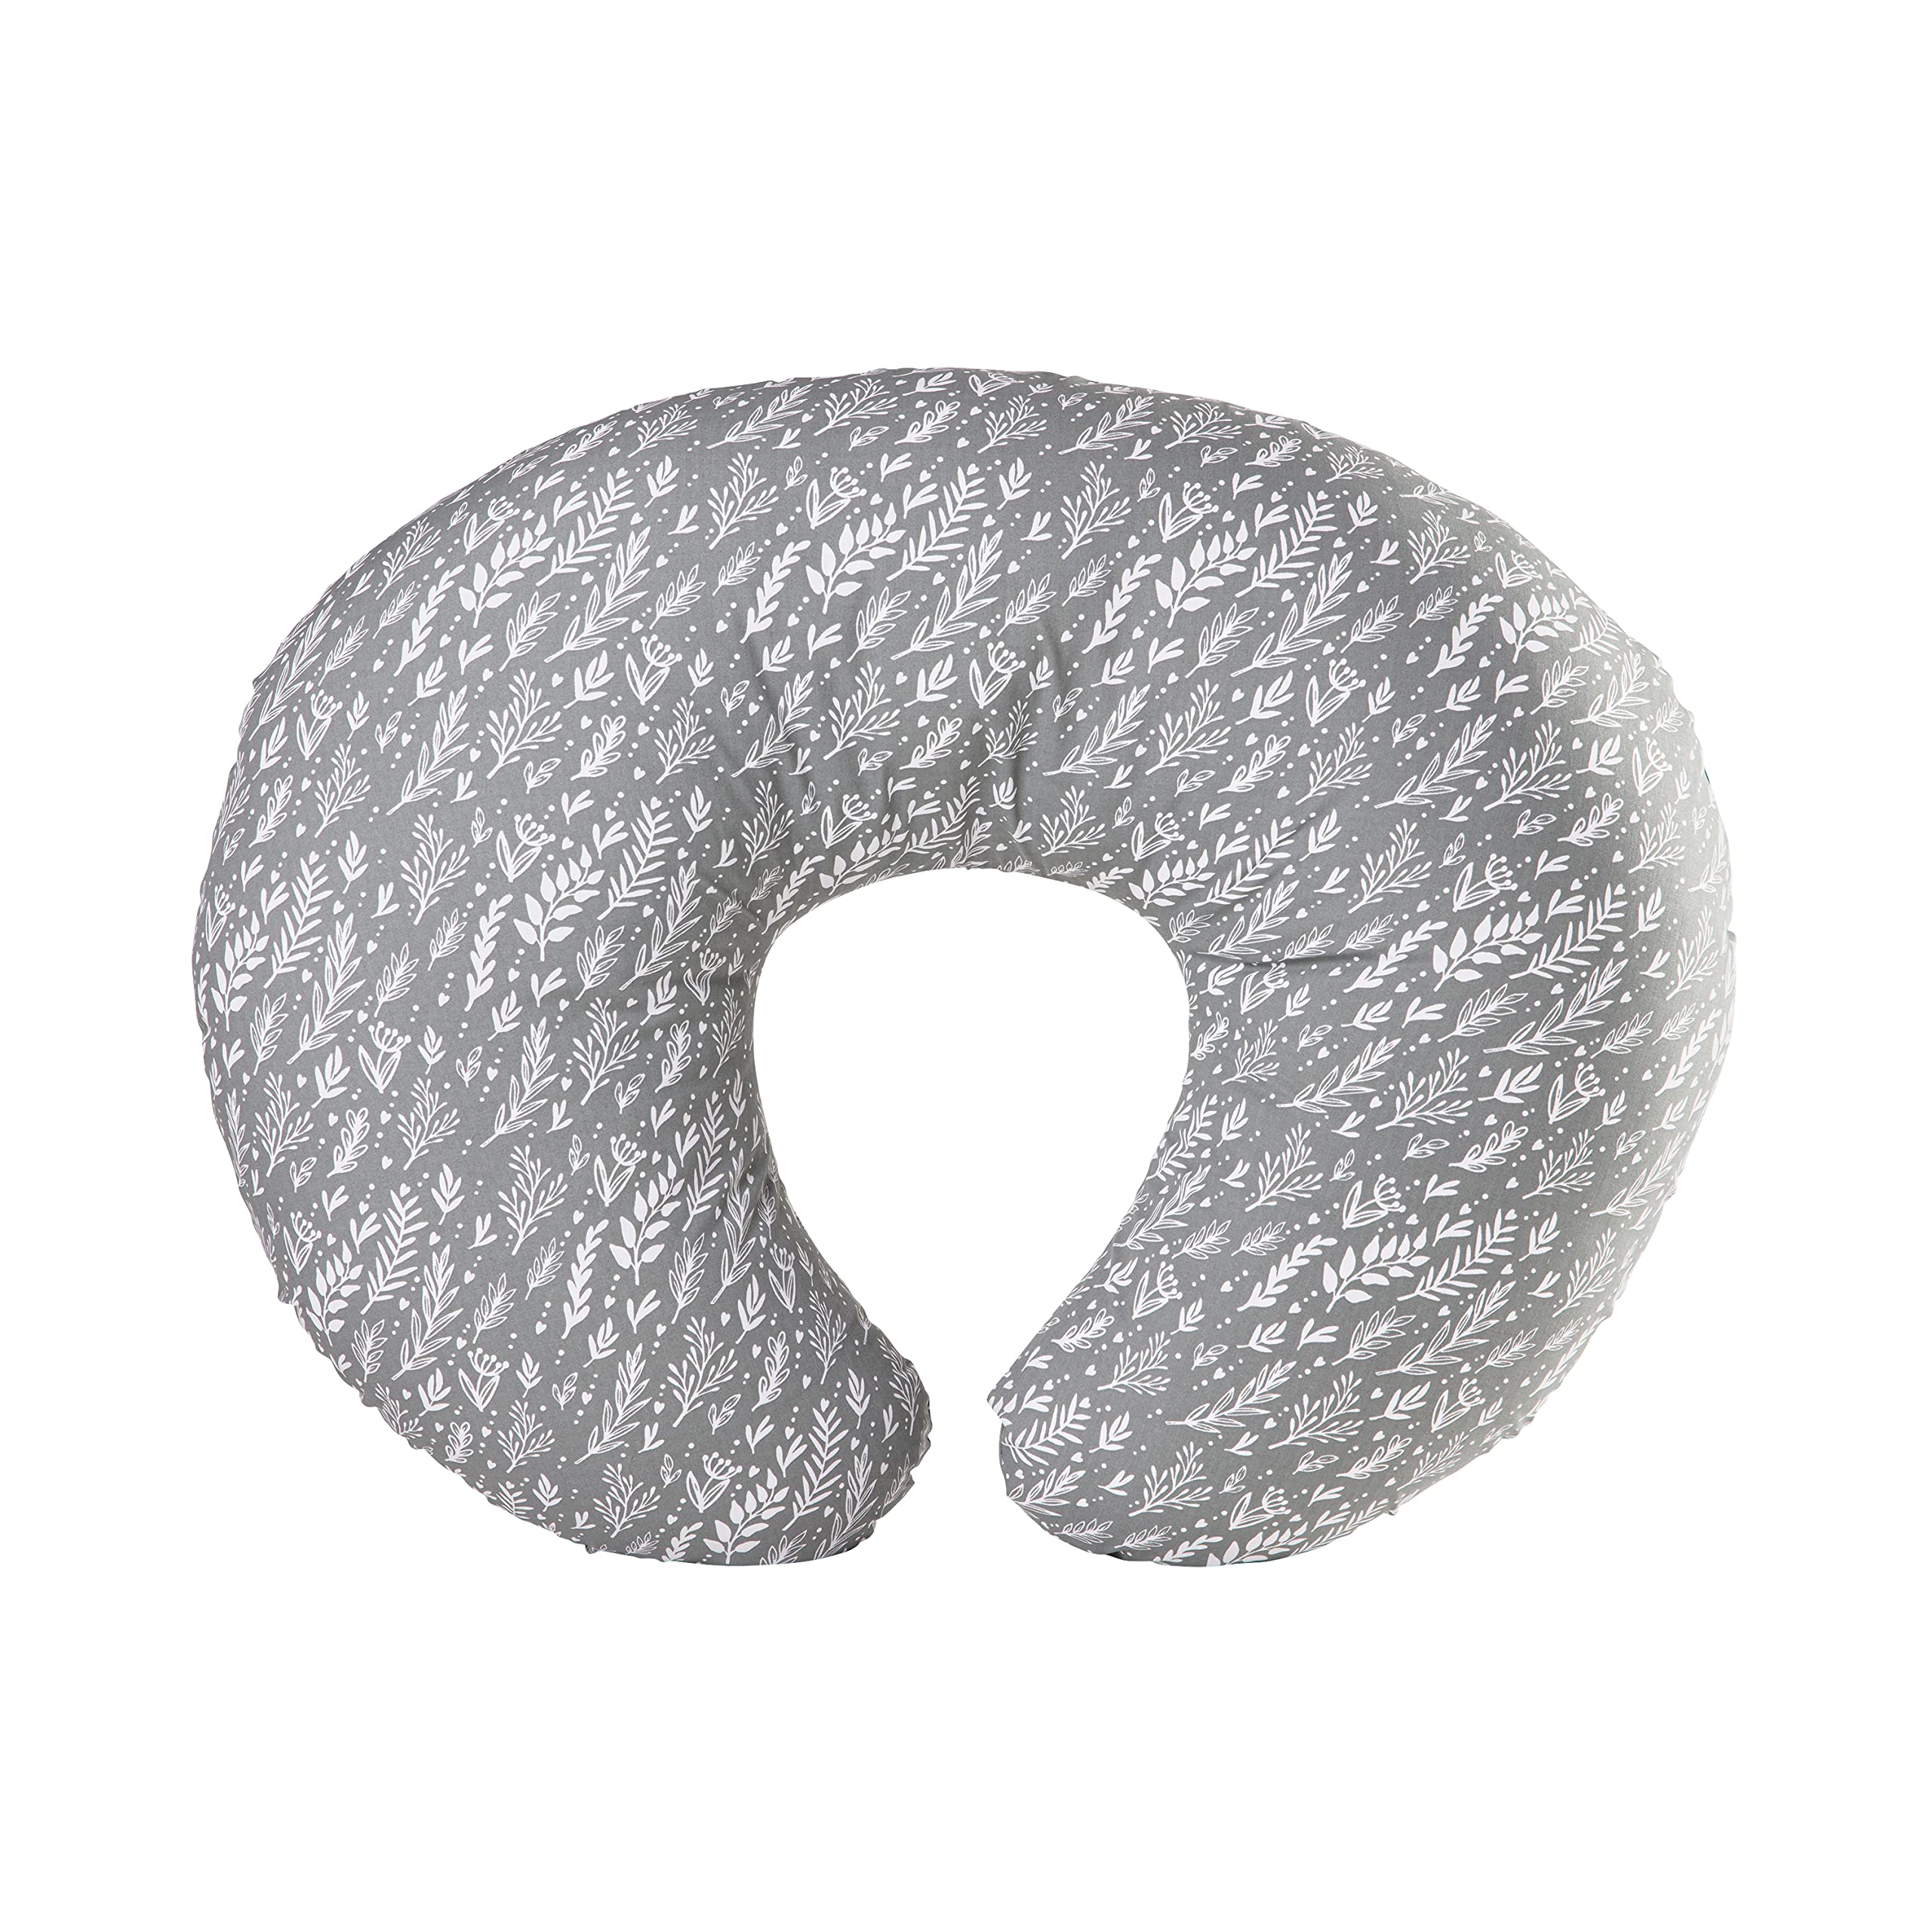 Dr. Brown's Removable Cover for Breastfeeding Pillow for Nursing Mothers, Machine Washable, Cotton Blend, Gray